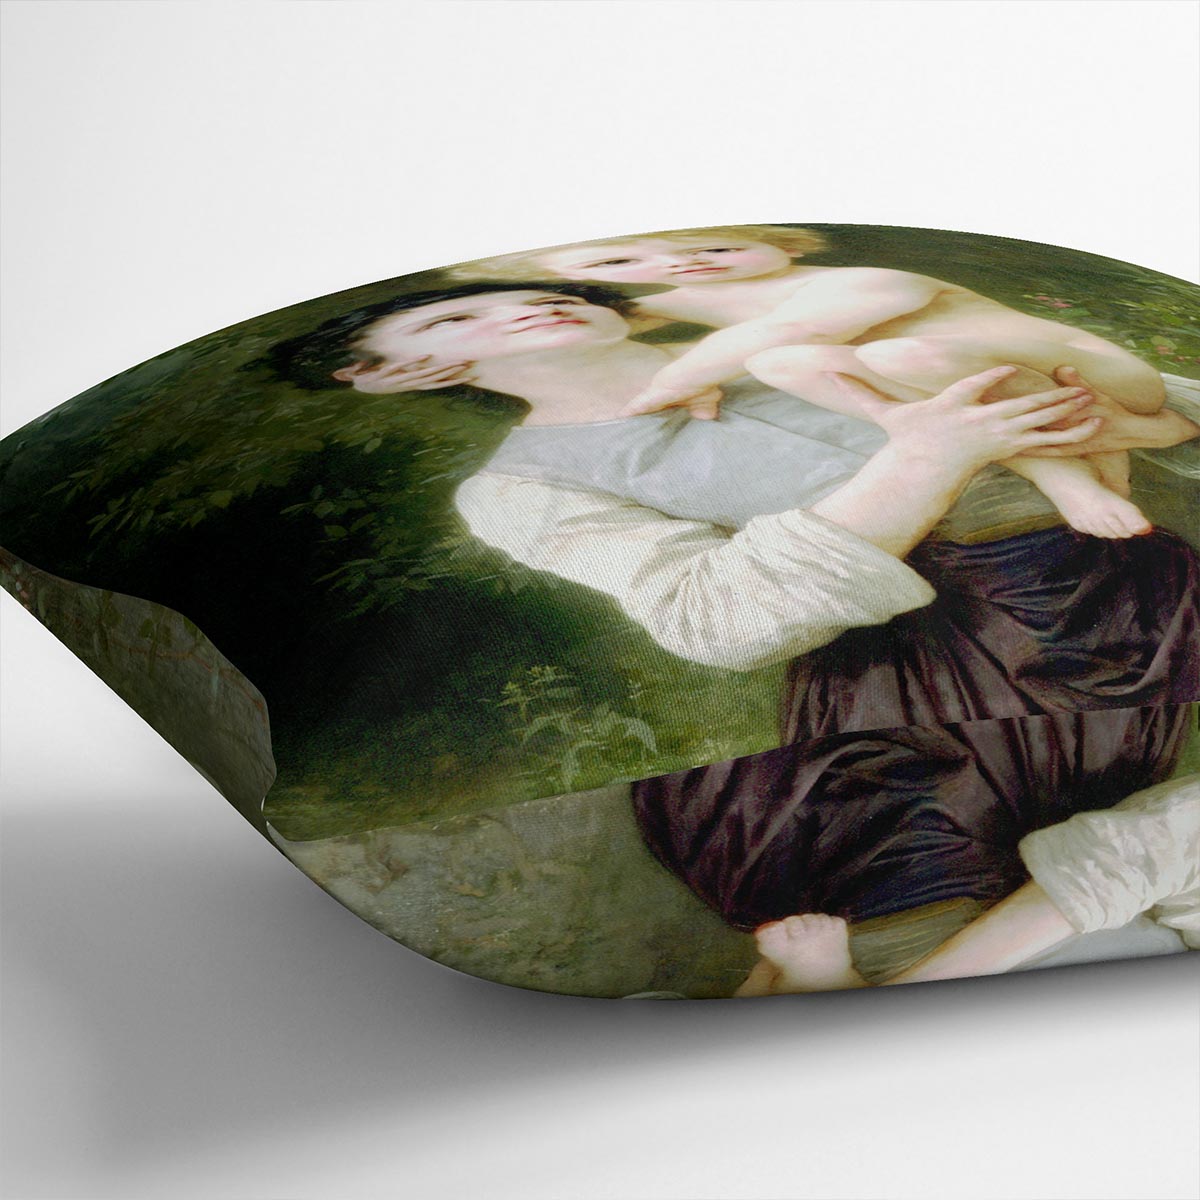 Brother And Sister By Bouguereau Cushion